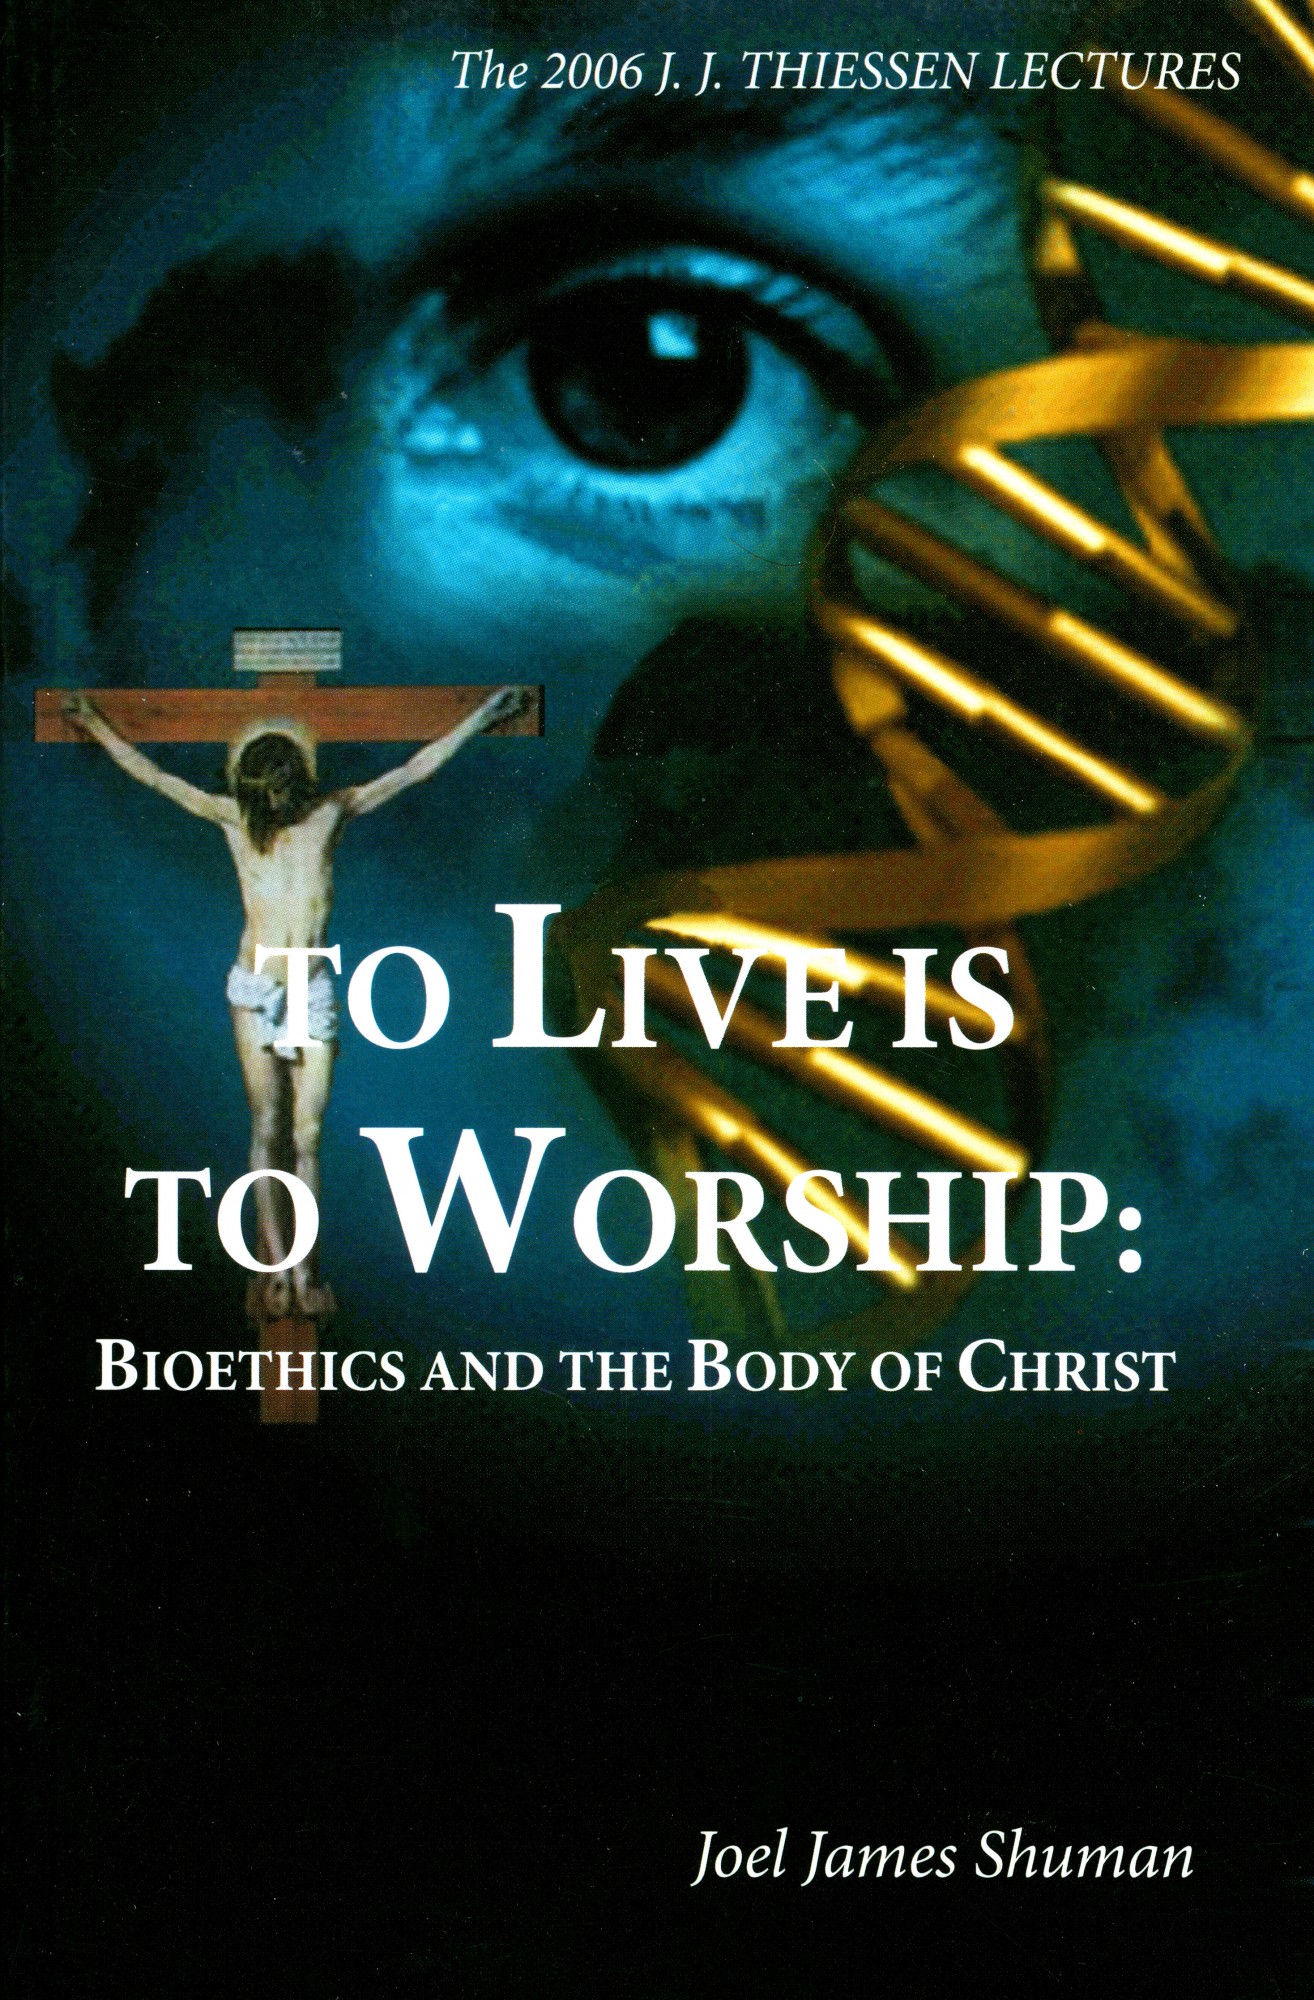 To Live is to Worship: Bioethics and the Body of Christ